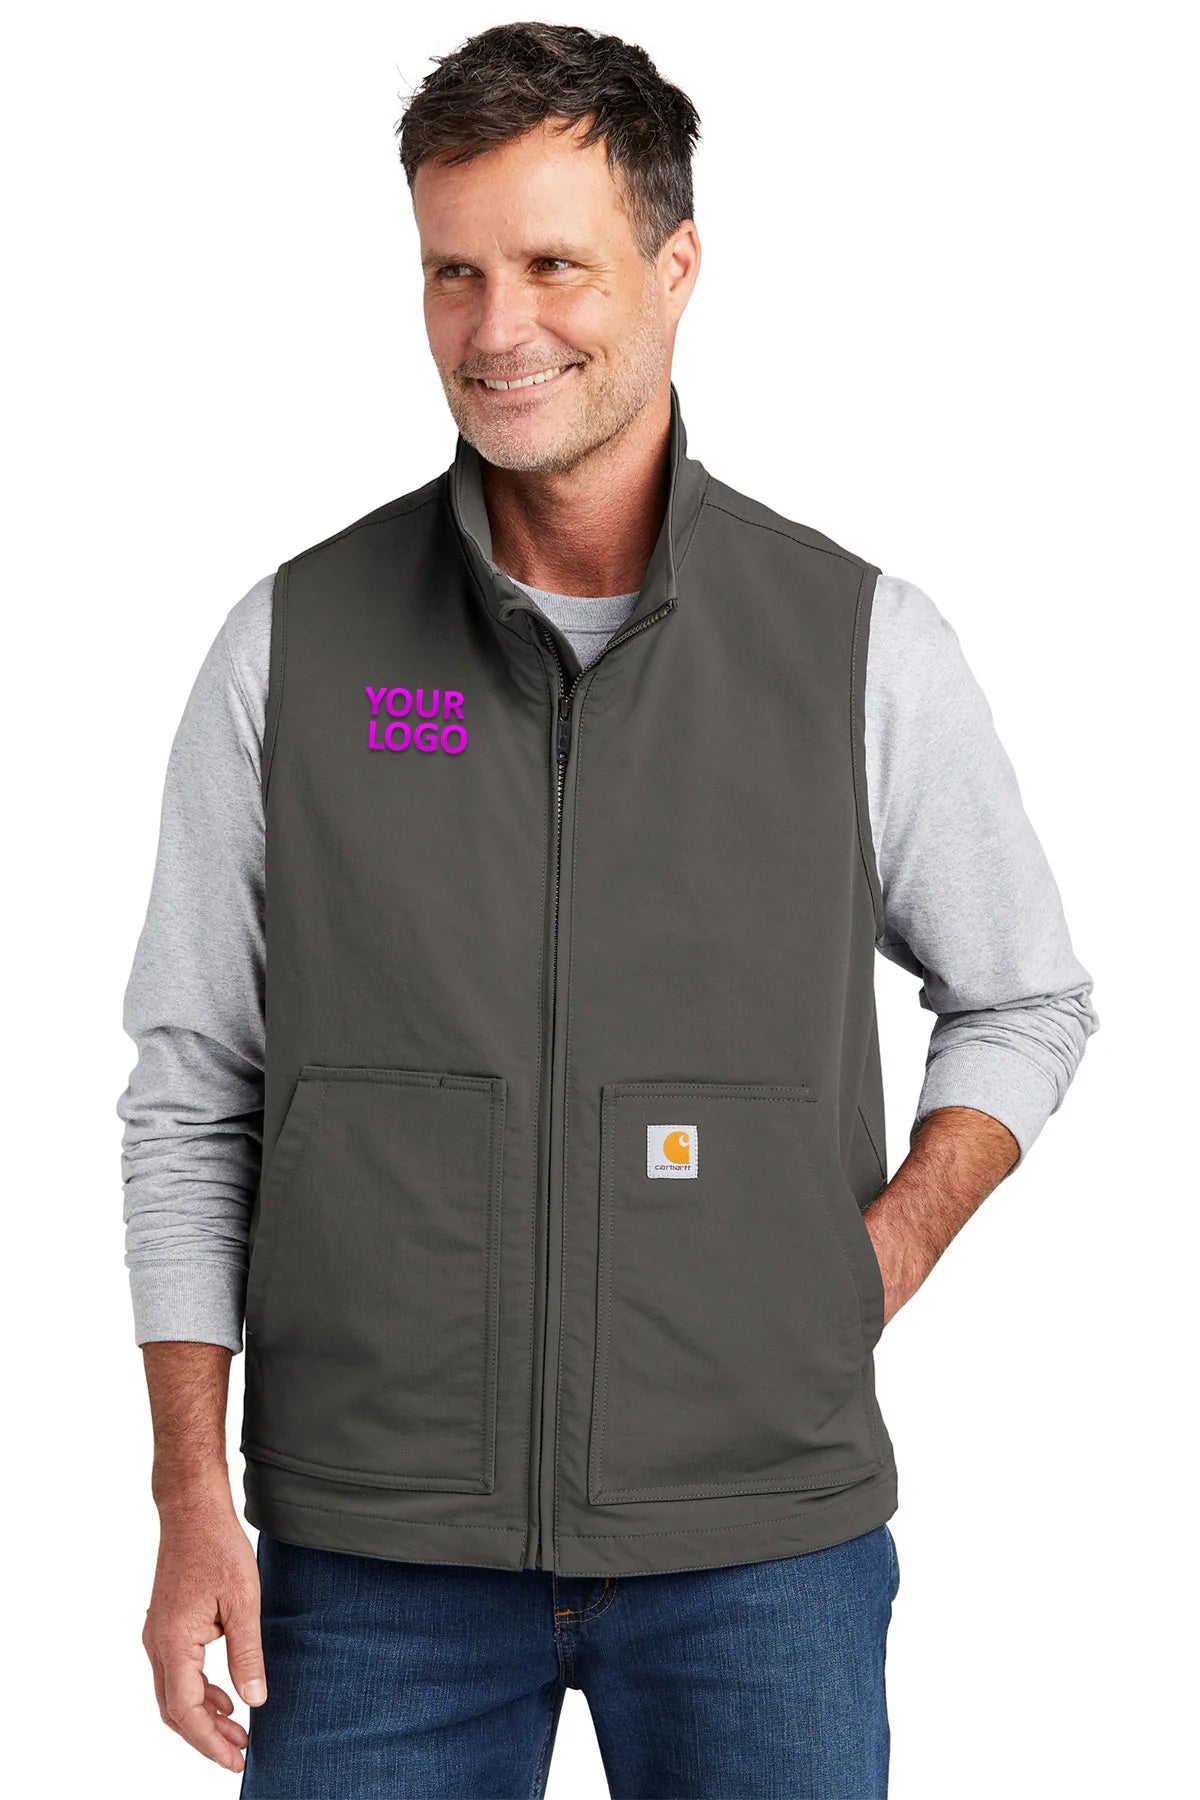 Carhartt Gravel CT105535 business jackets with logo